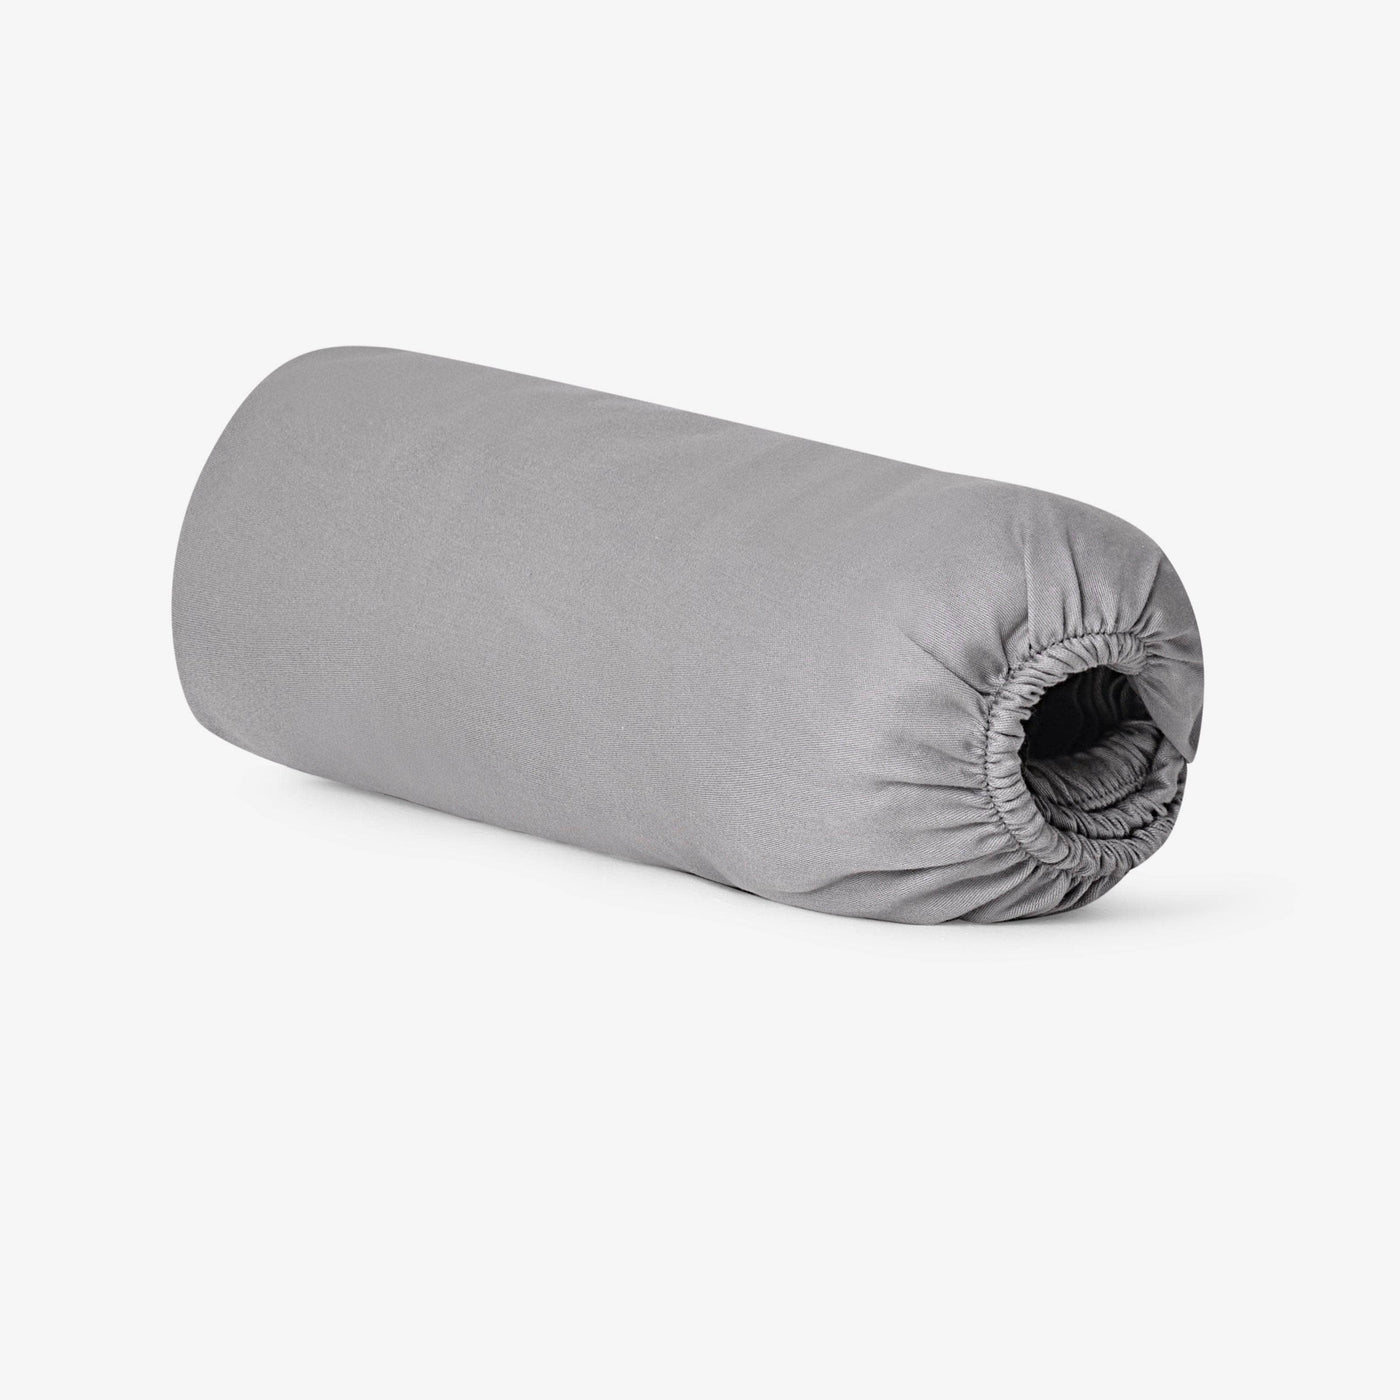 Charles 100% Turkish Cotton Sateen 210 TC Fitted Sheet, Grey, Double Size Bed Sheets sazy.com